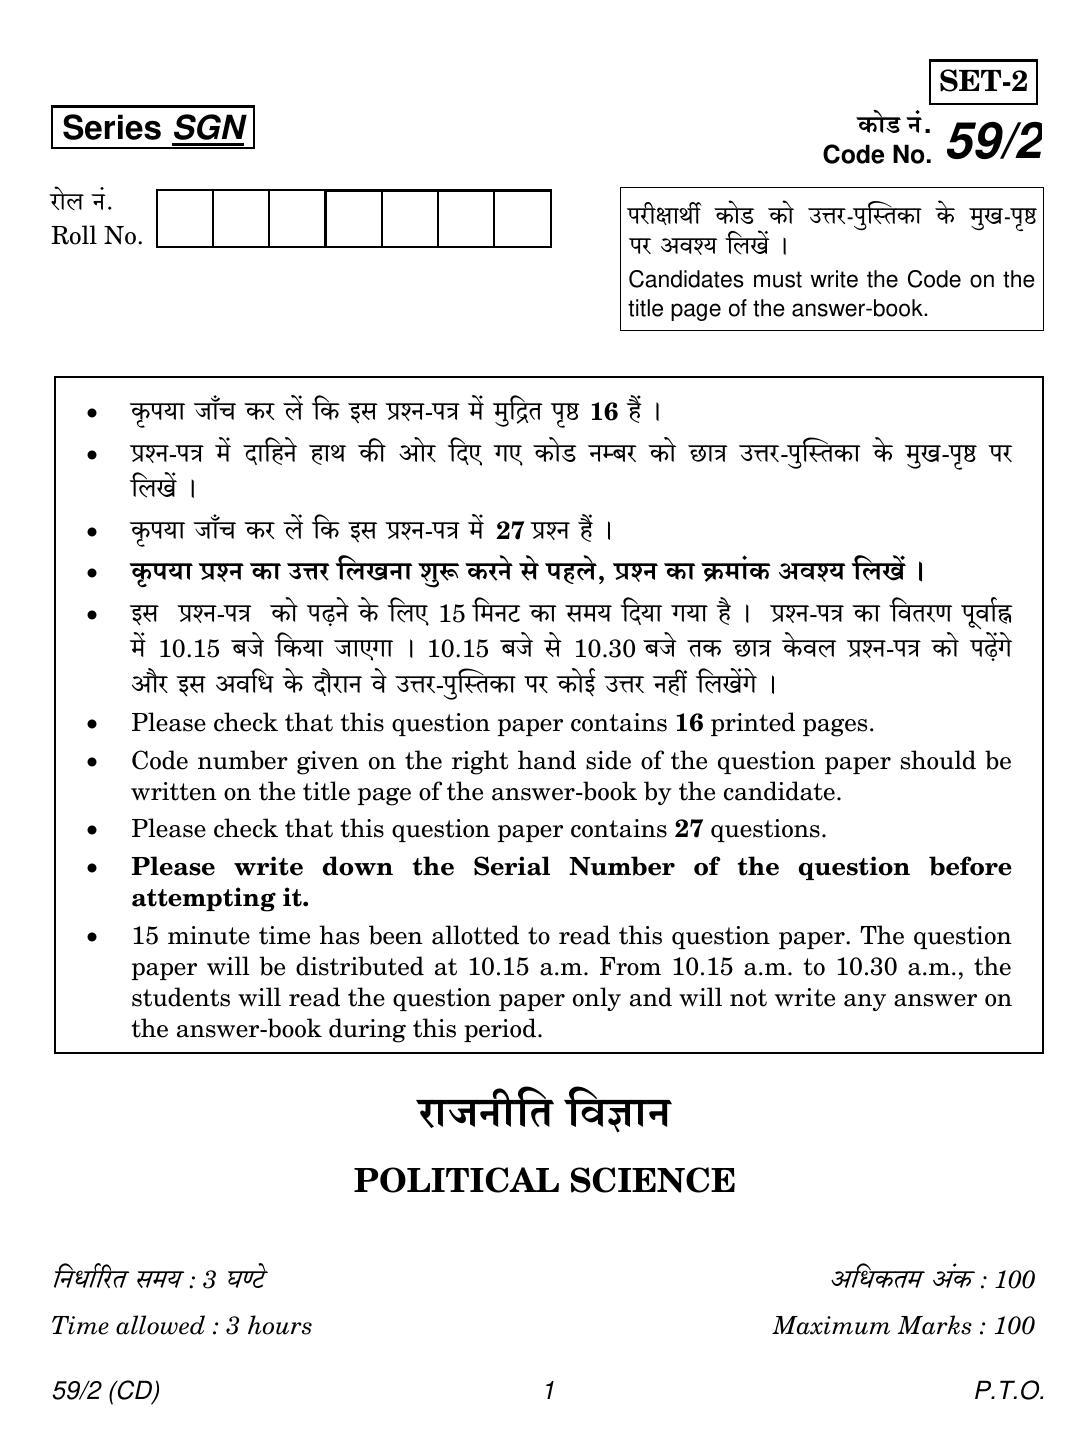 CBSE Class 12 59-2 POLITICAL SCIENCE CD 2018 Question Paper - Page 1